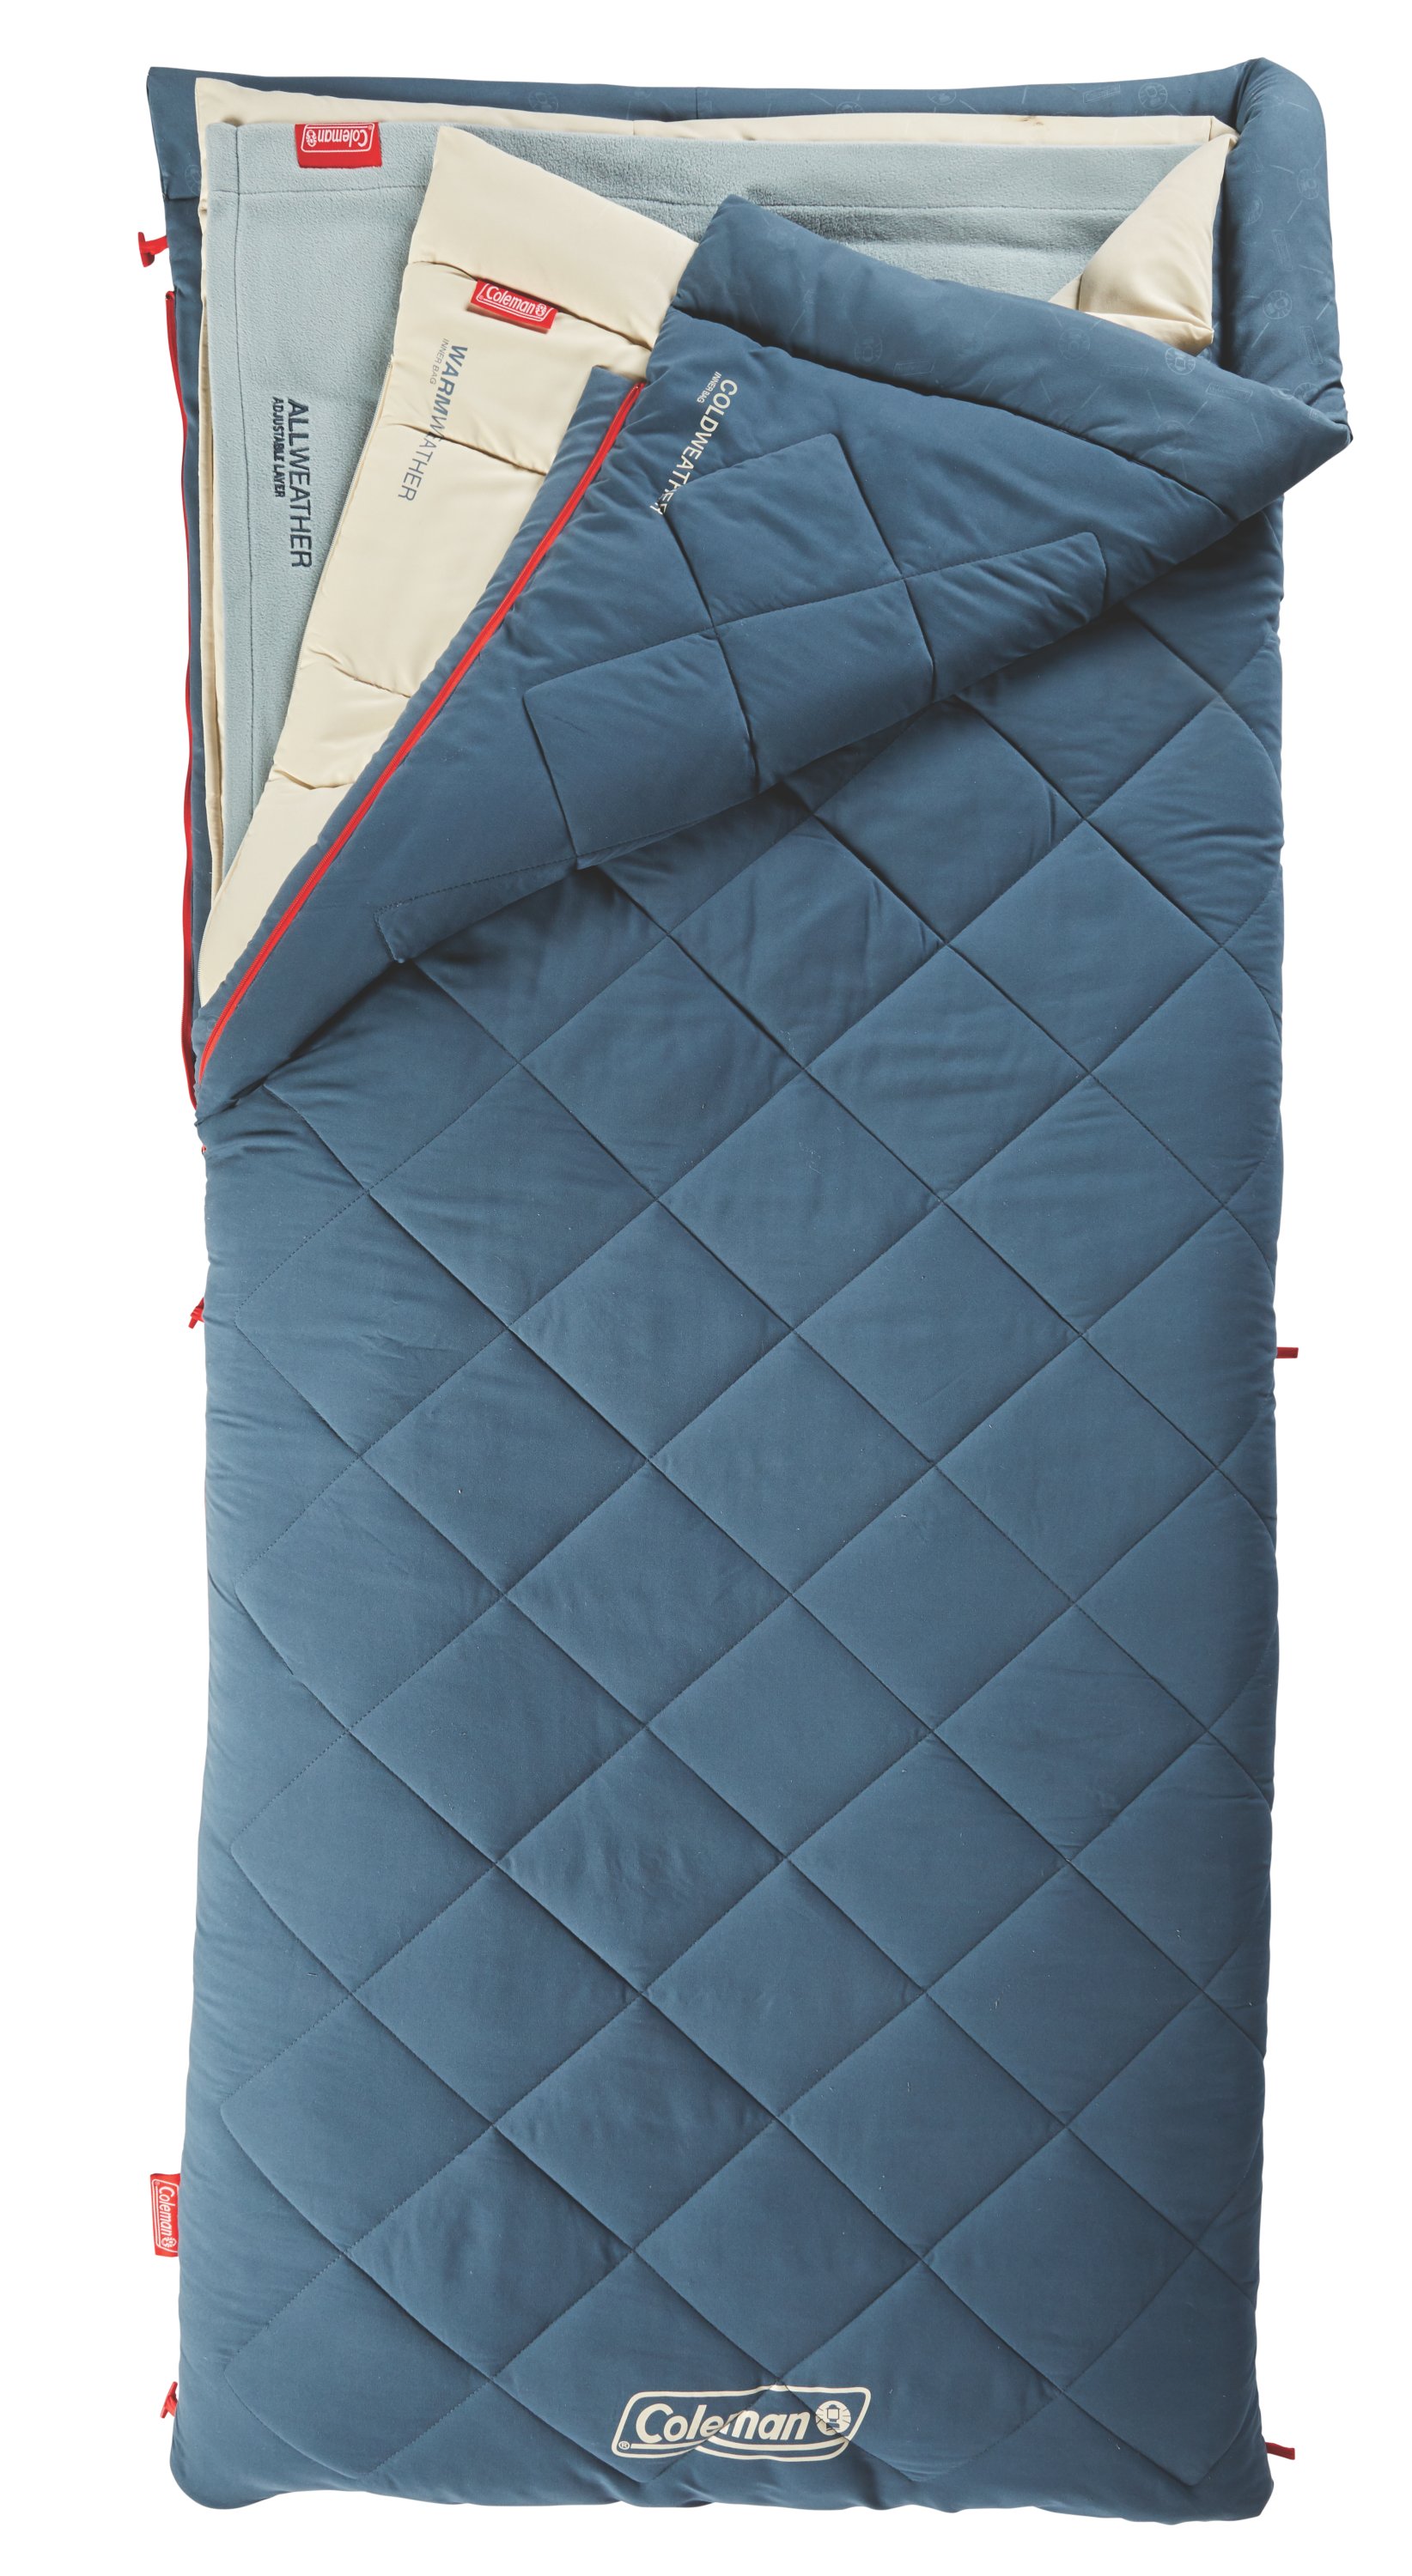 All-Weather Multi-Layer Sleeping | Coleman